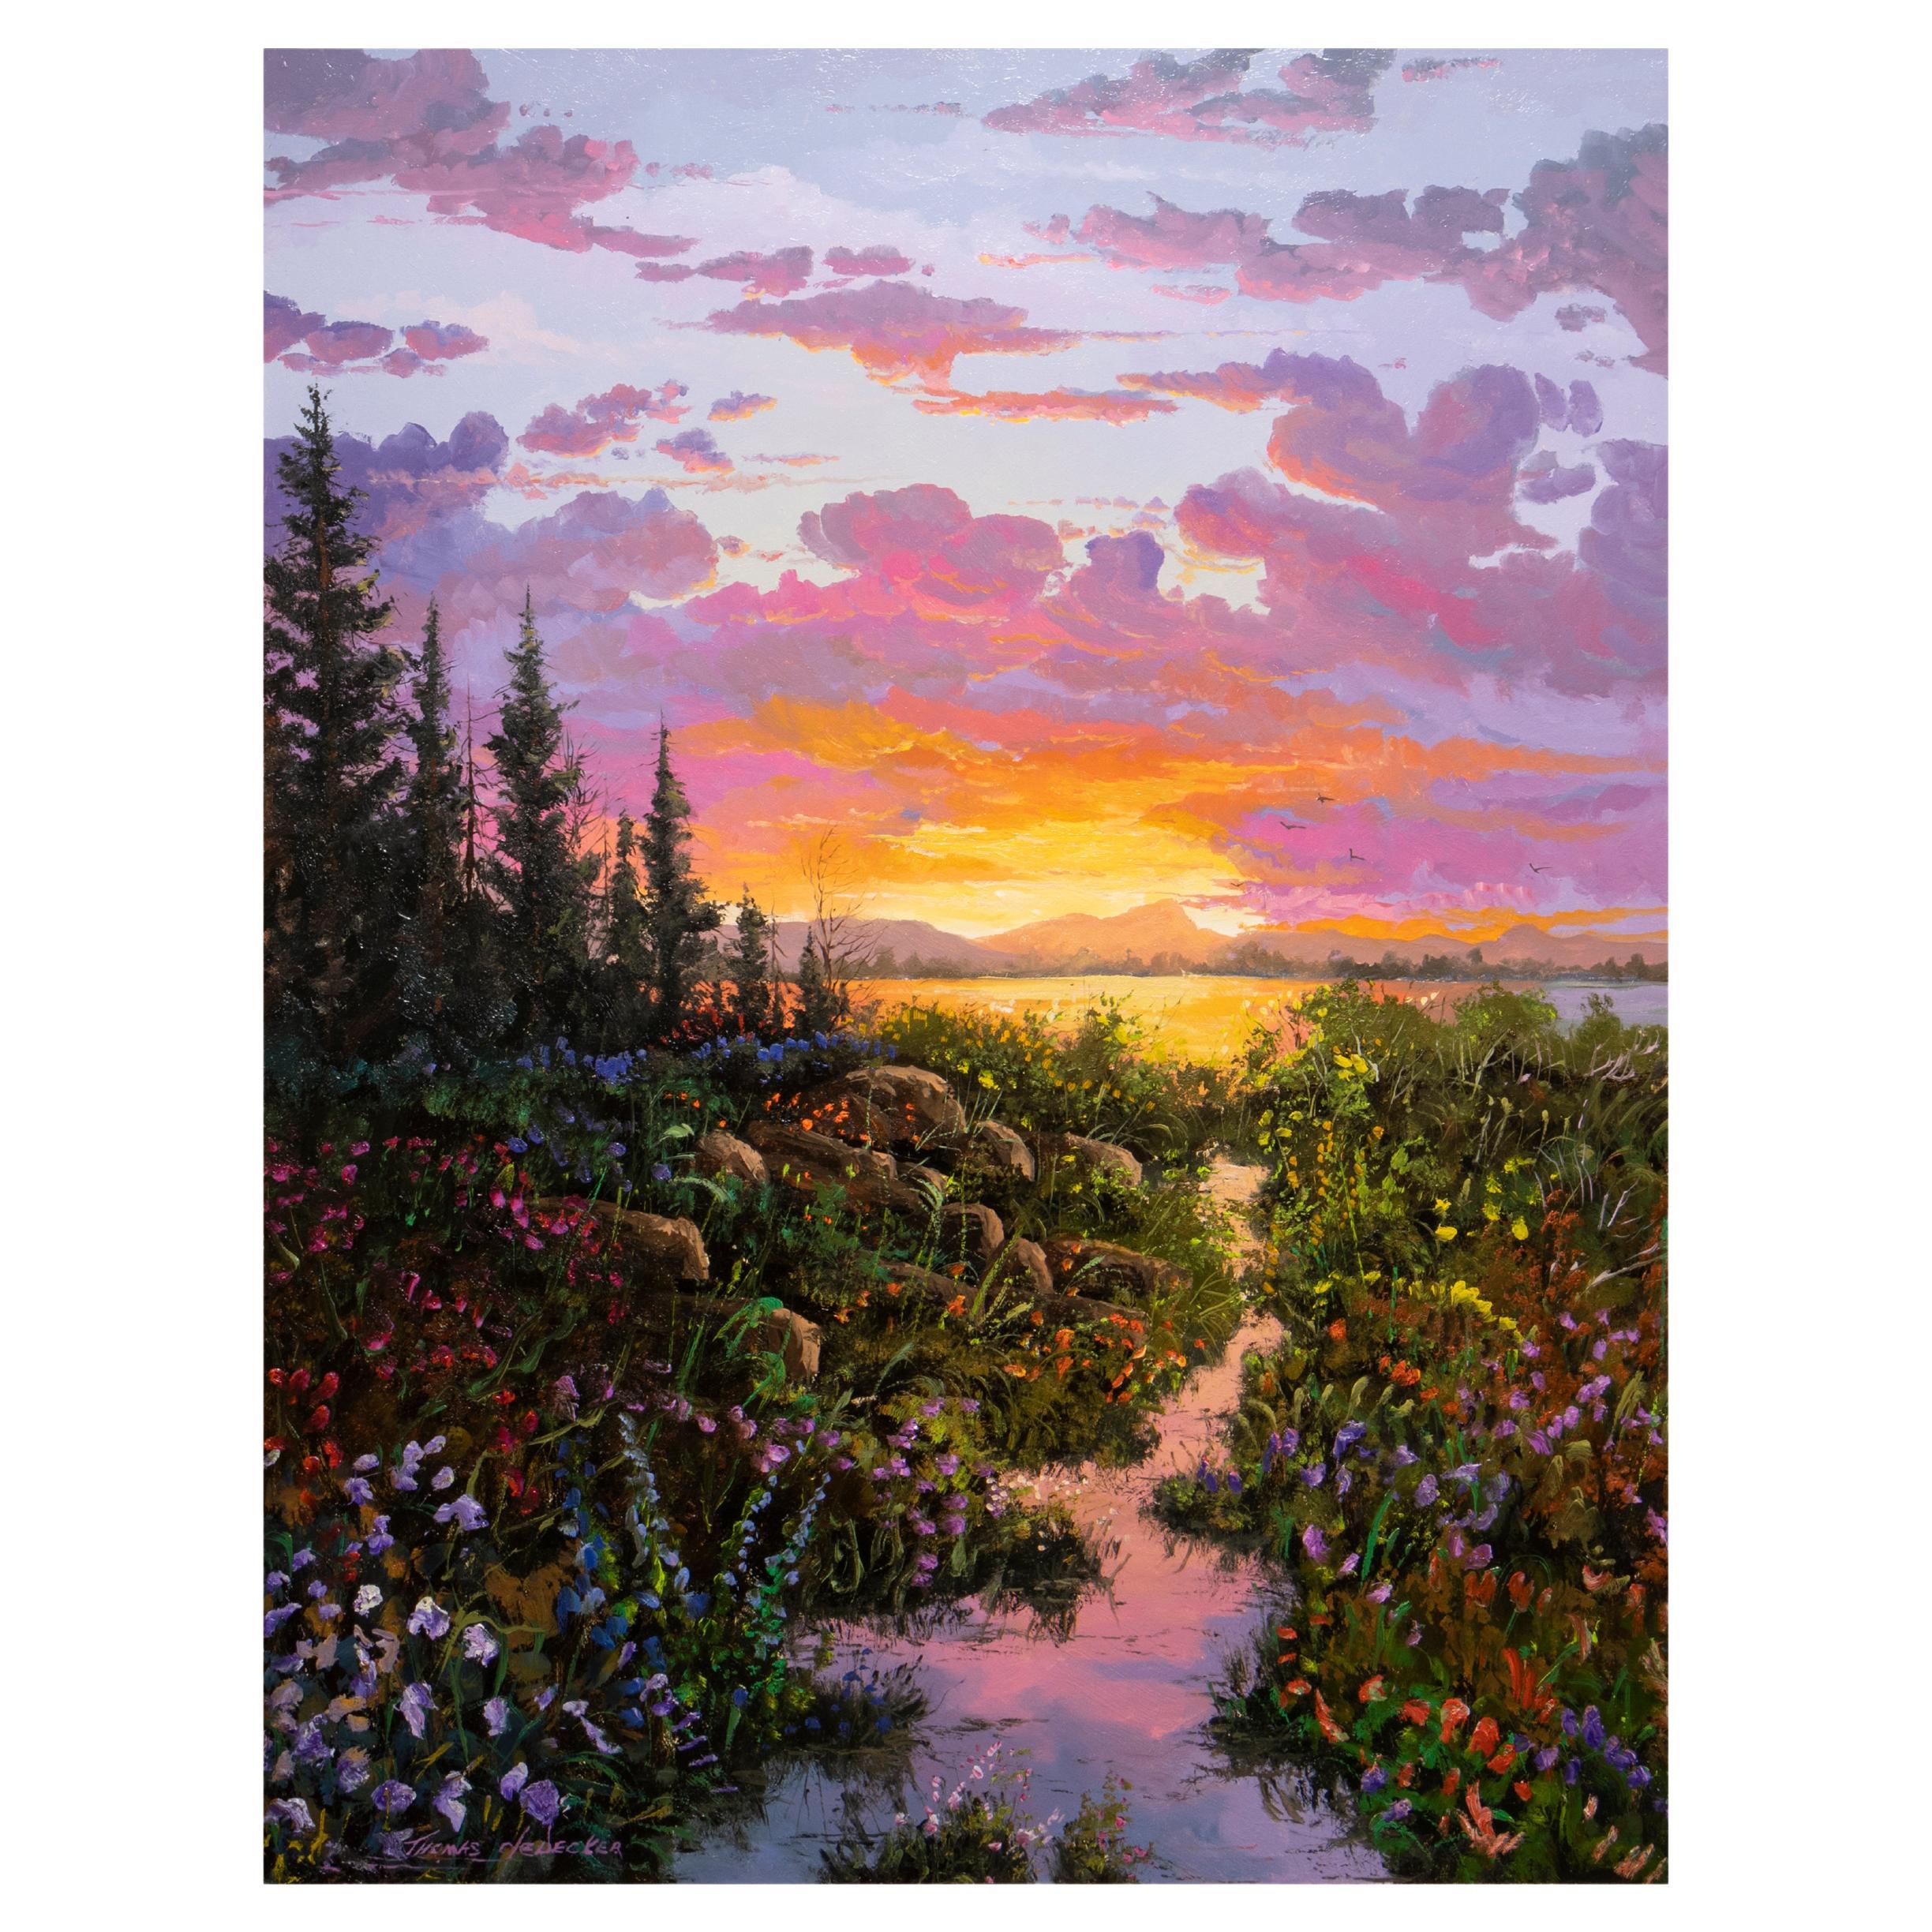 Original Painting "Summer's Day End" by Thomas deDecker